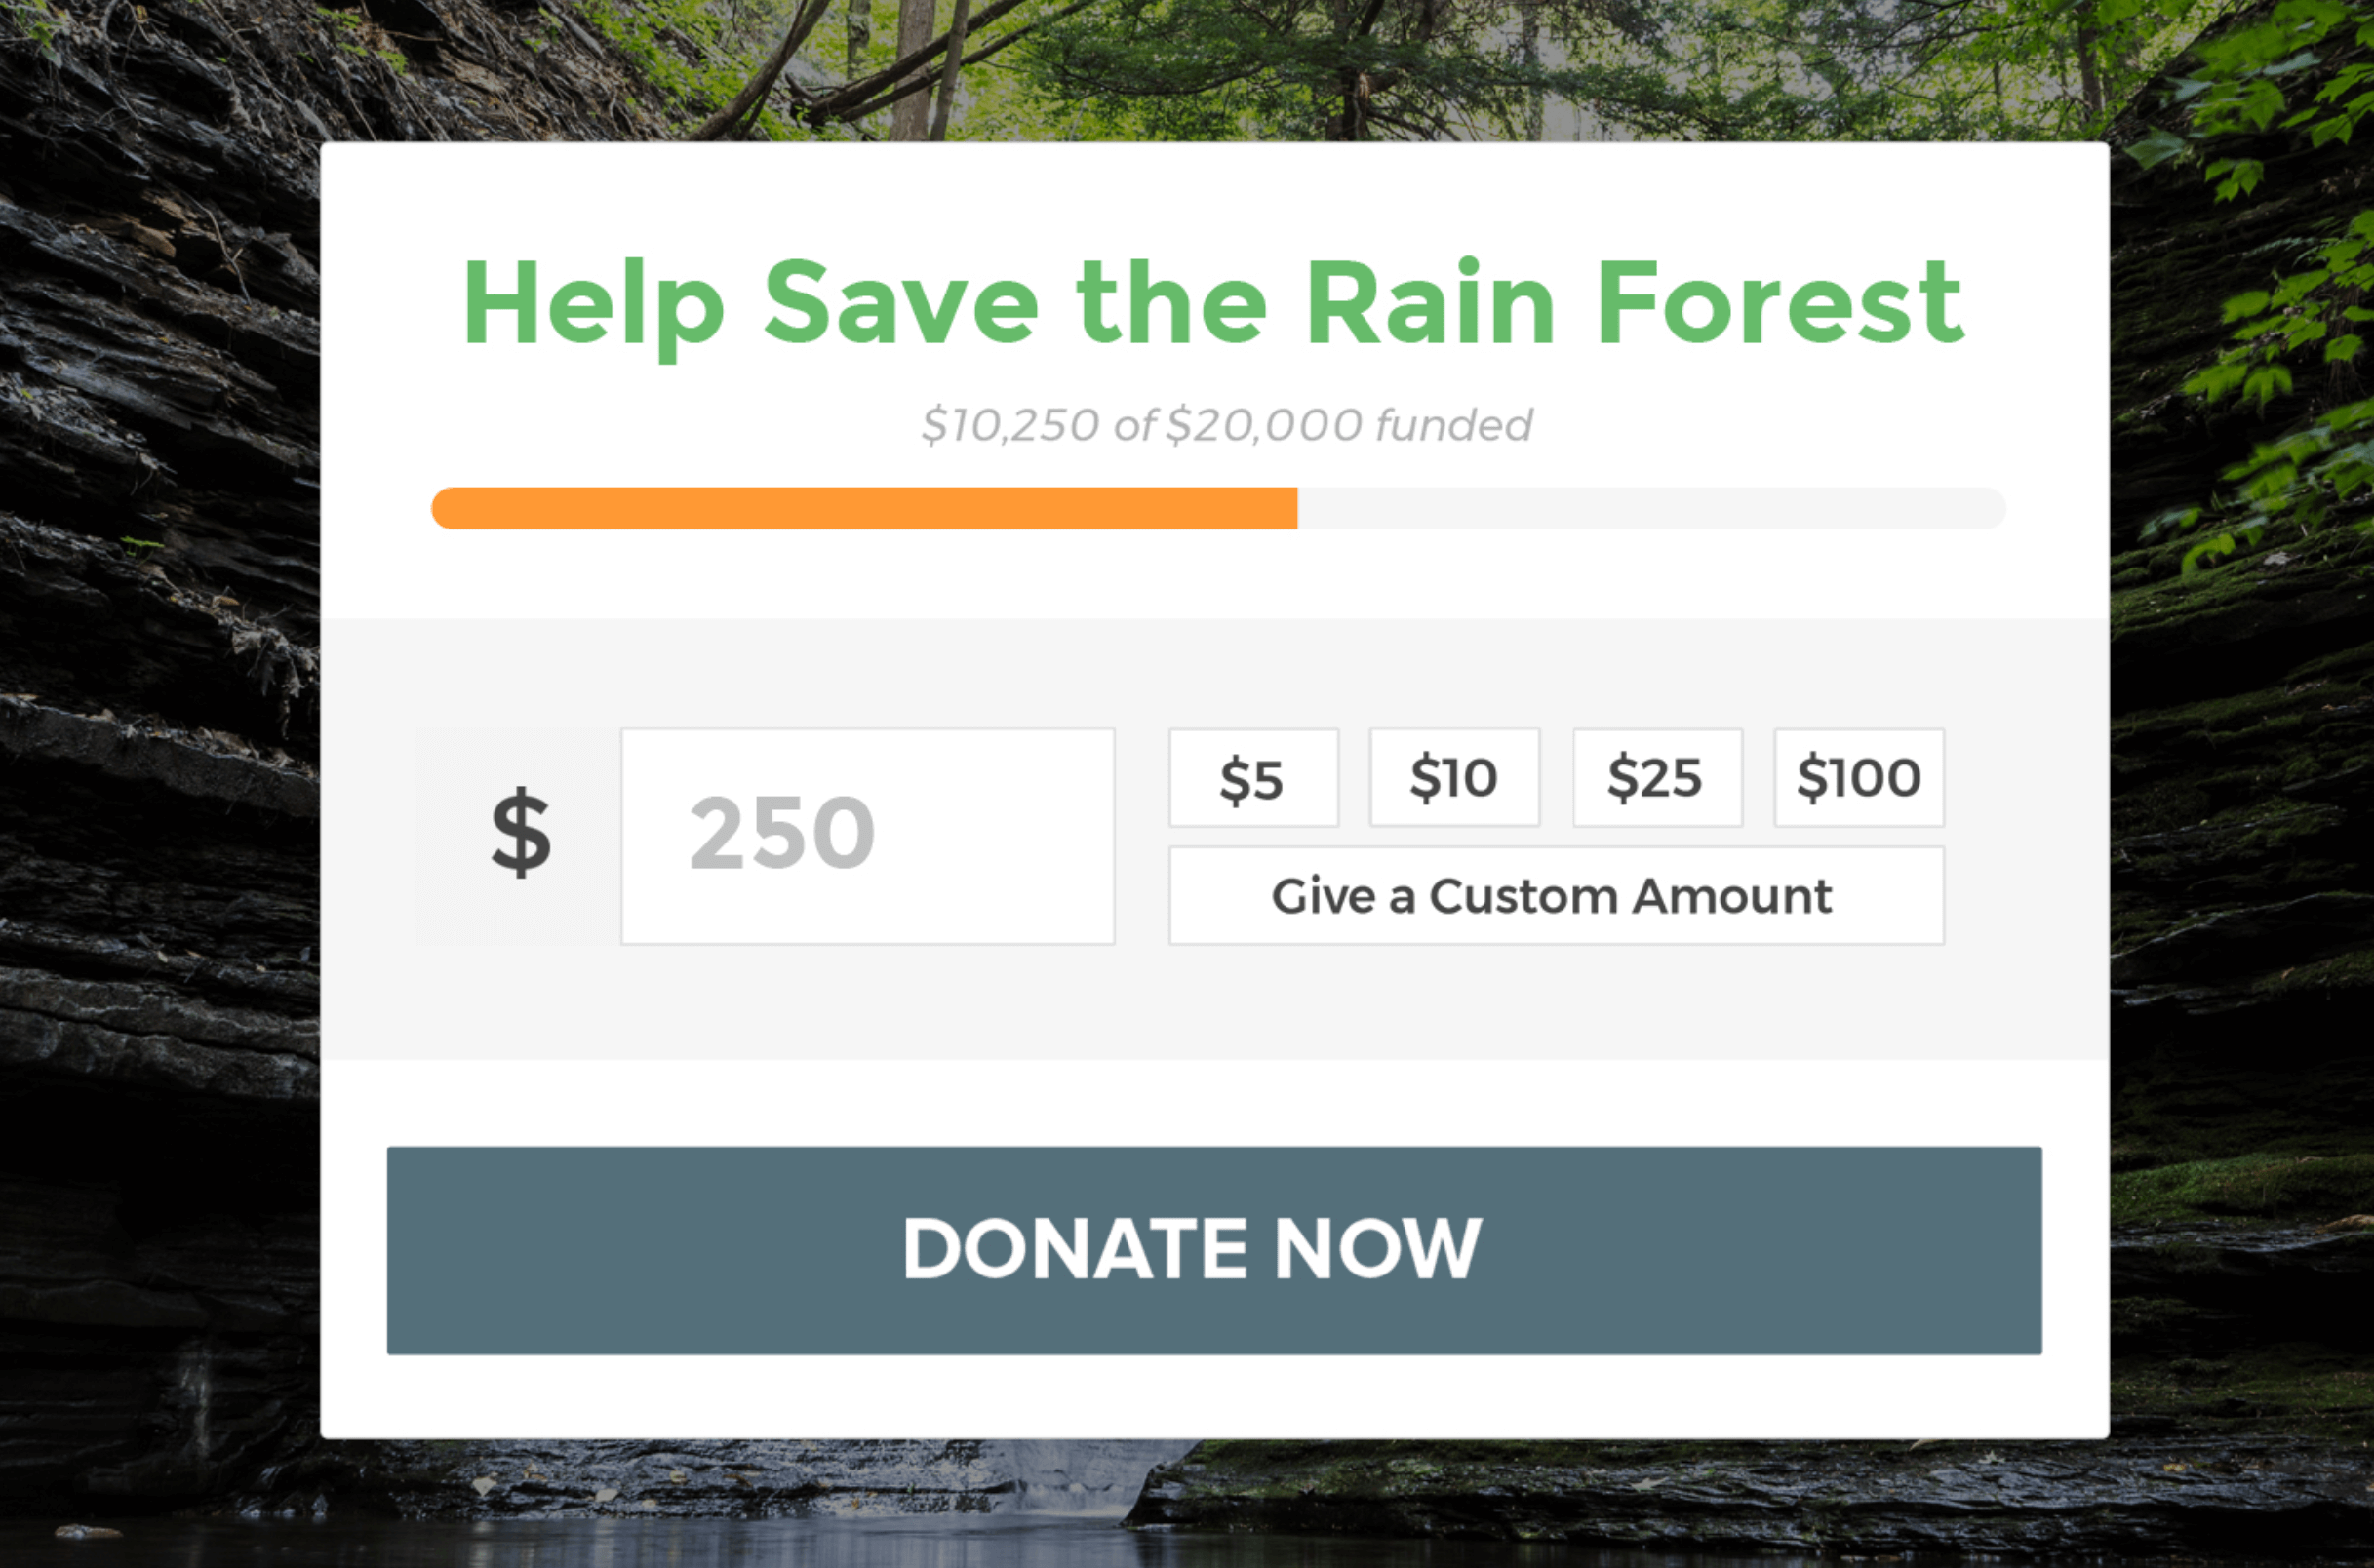 An example of how the funding goal and current donations can be displayed.